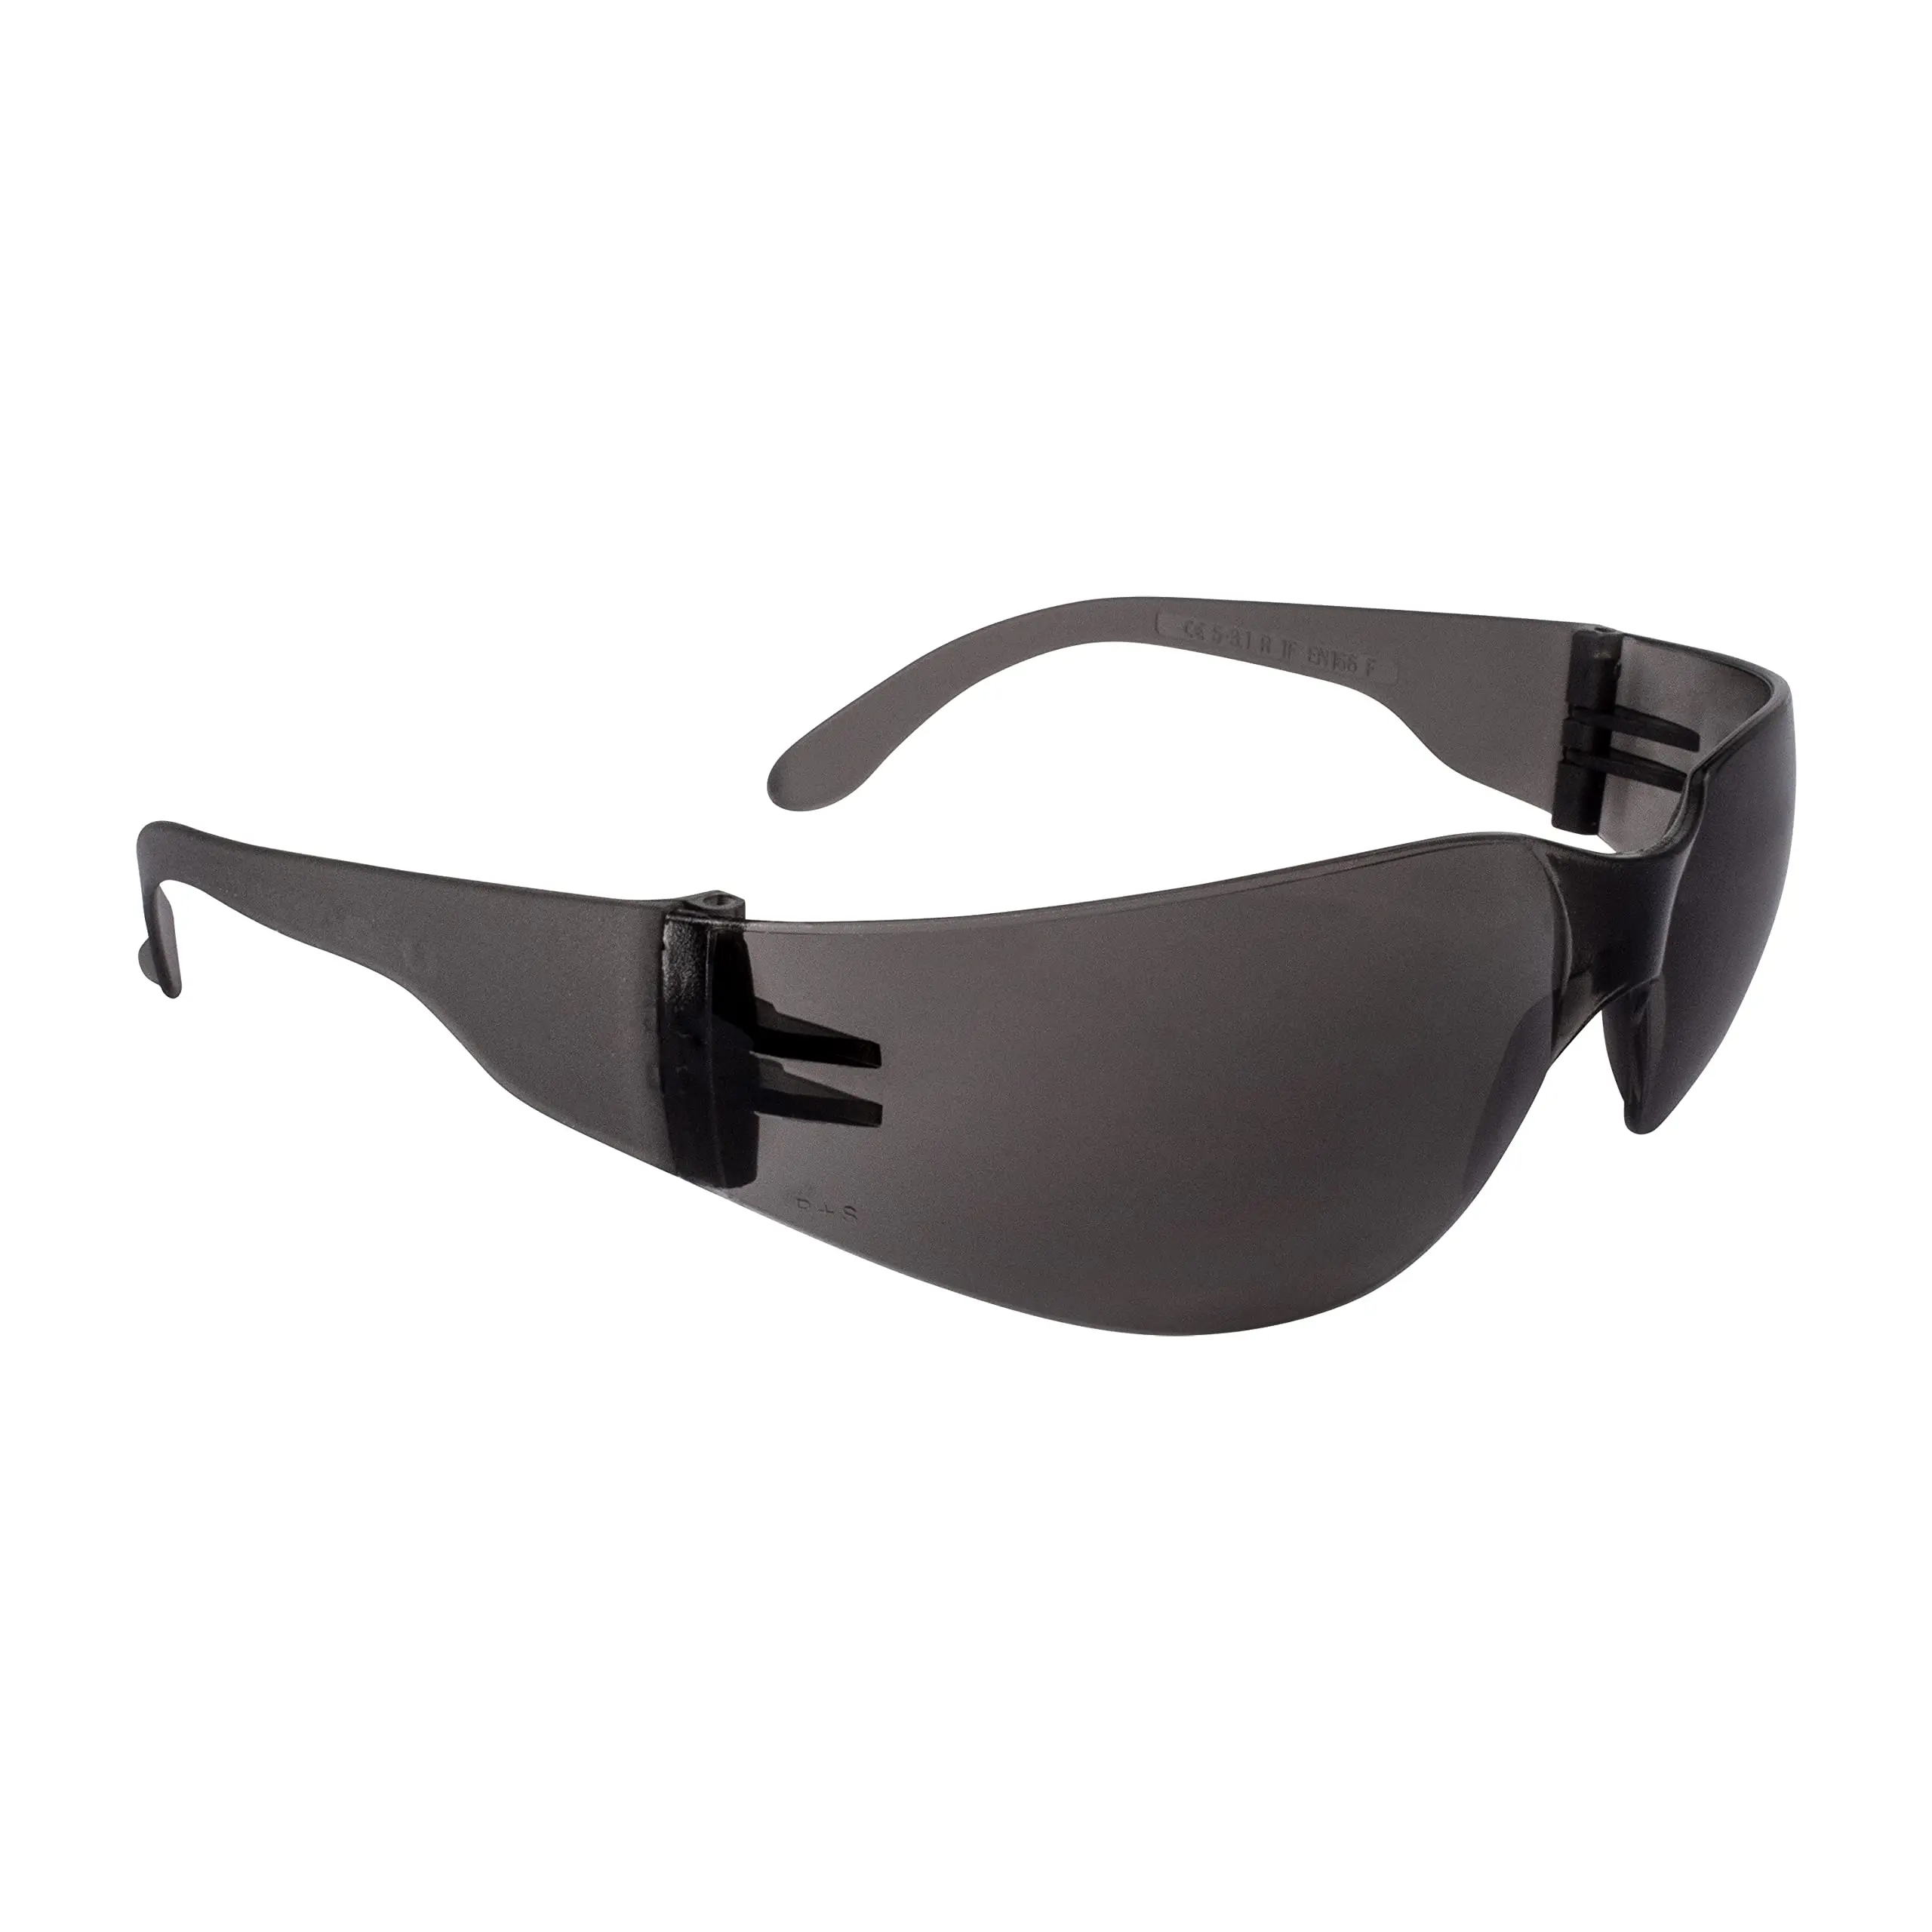 smoked safety glasses - What is tint safety glasses